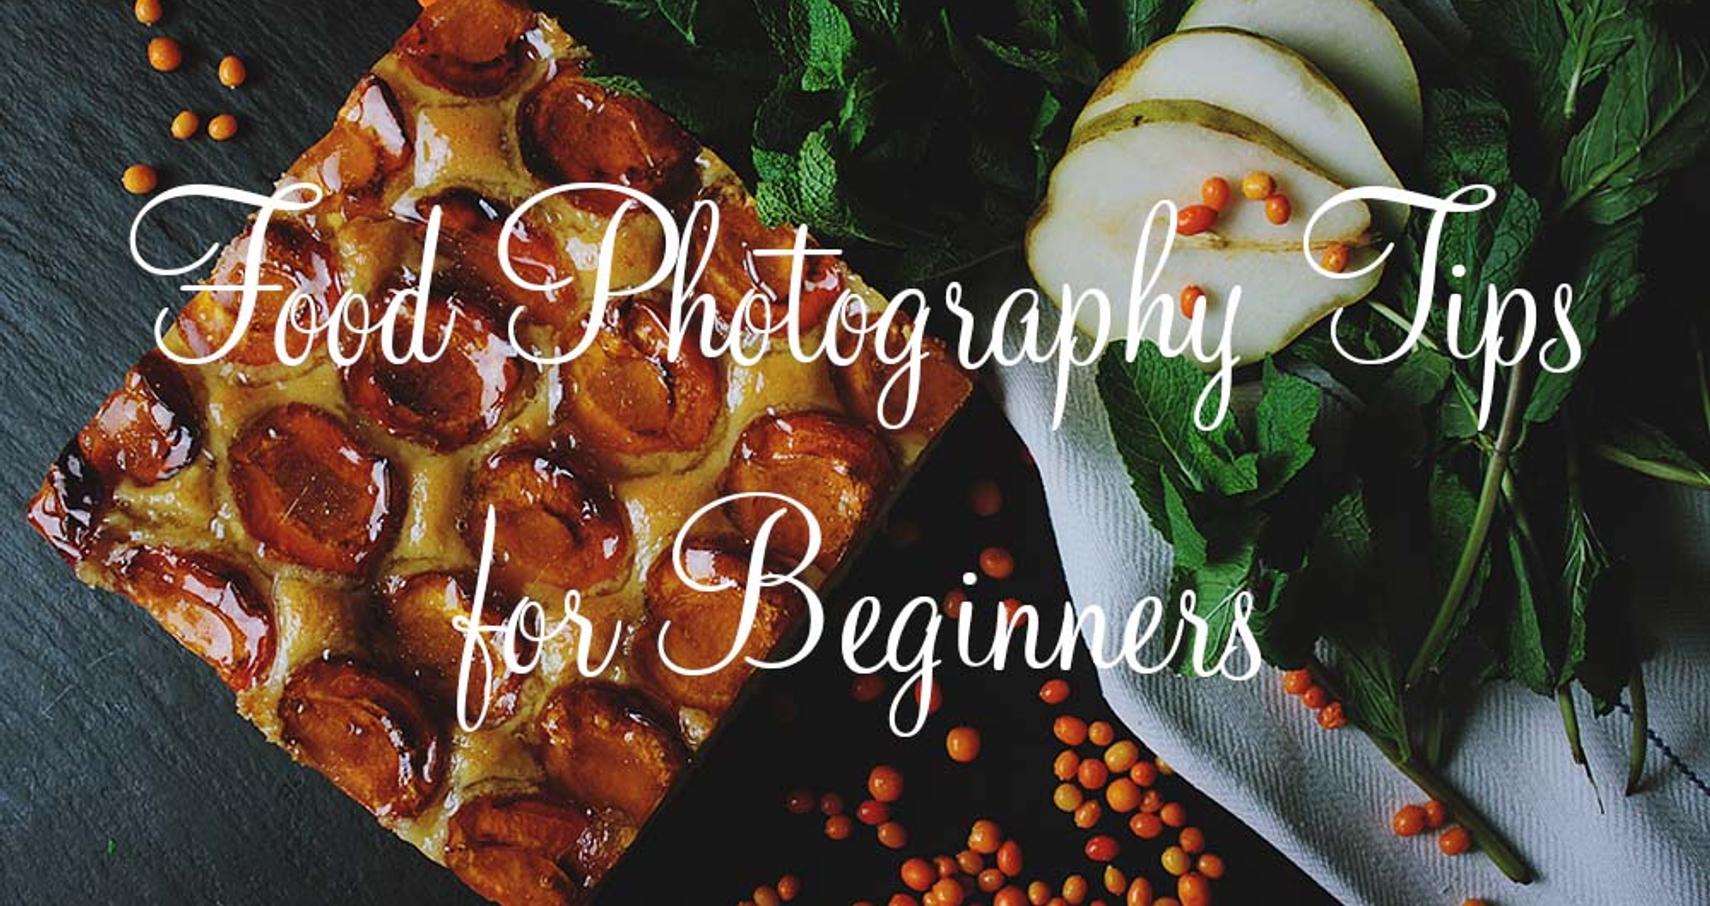 Using a Tilt-Shift Lens in Food Photography - Image Examples